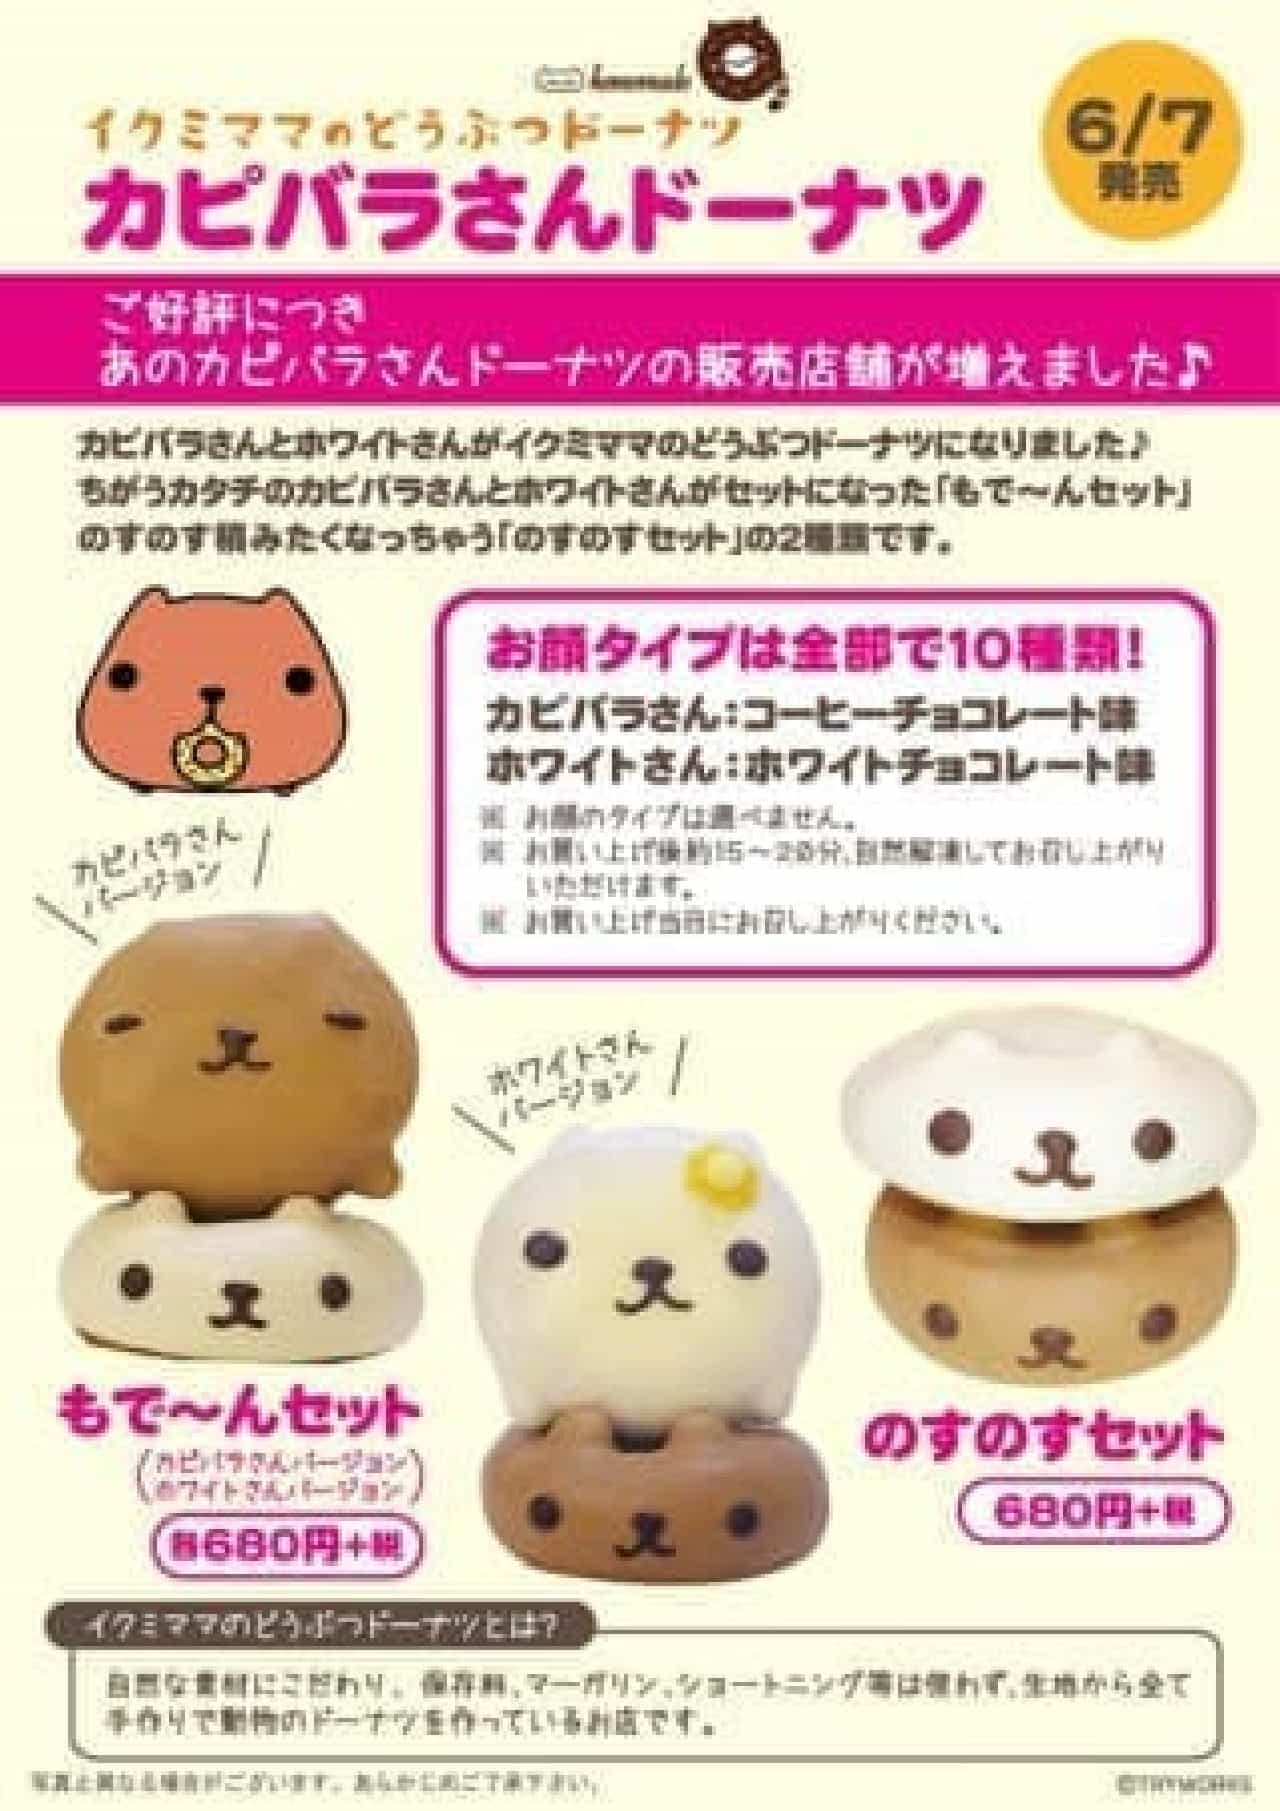 Kapibara-san will increase the number of donut stores